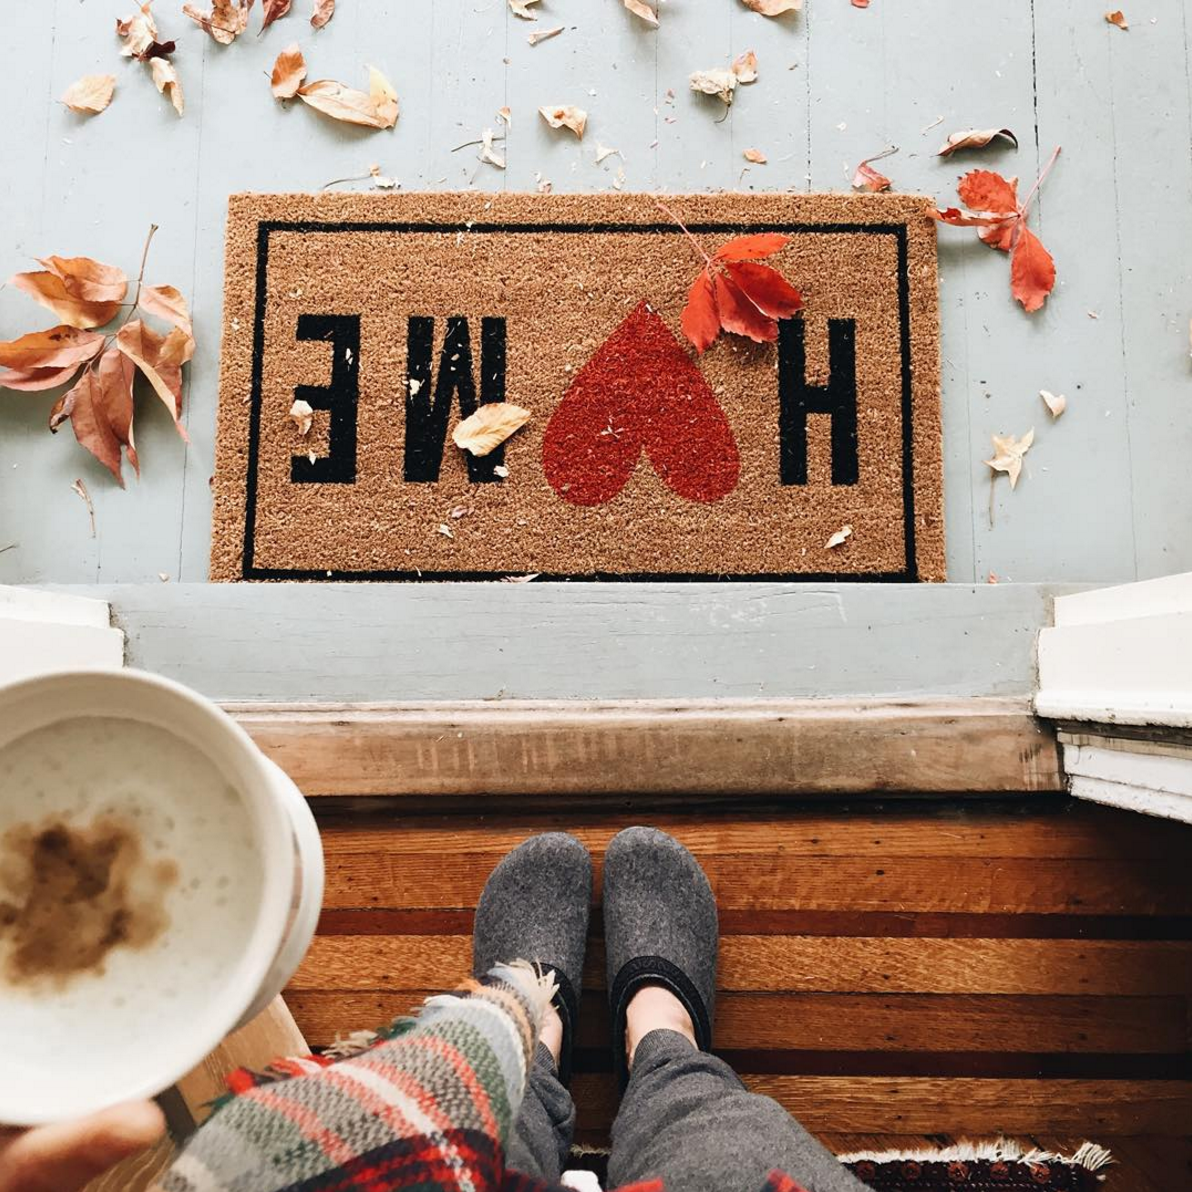 Where to Find The Cutest Doormats Ever: Home Doormat. Click through for the details. | glitterinc.com | @glitterinc